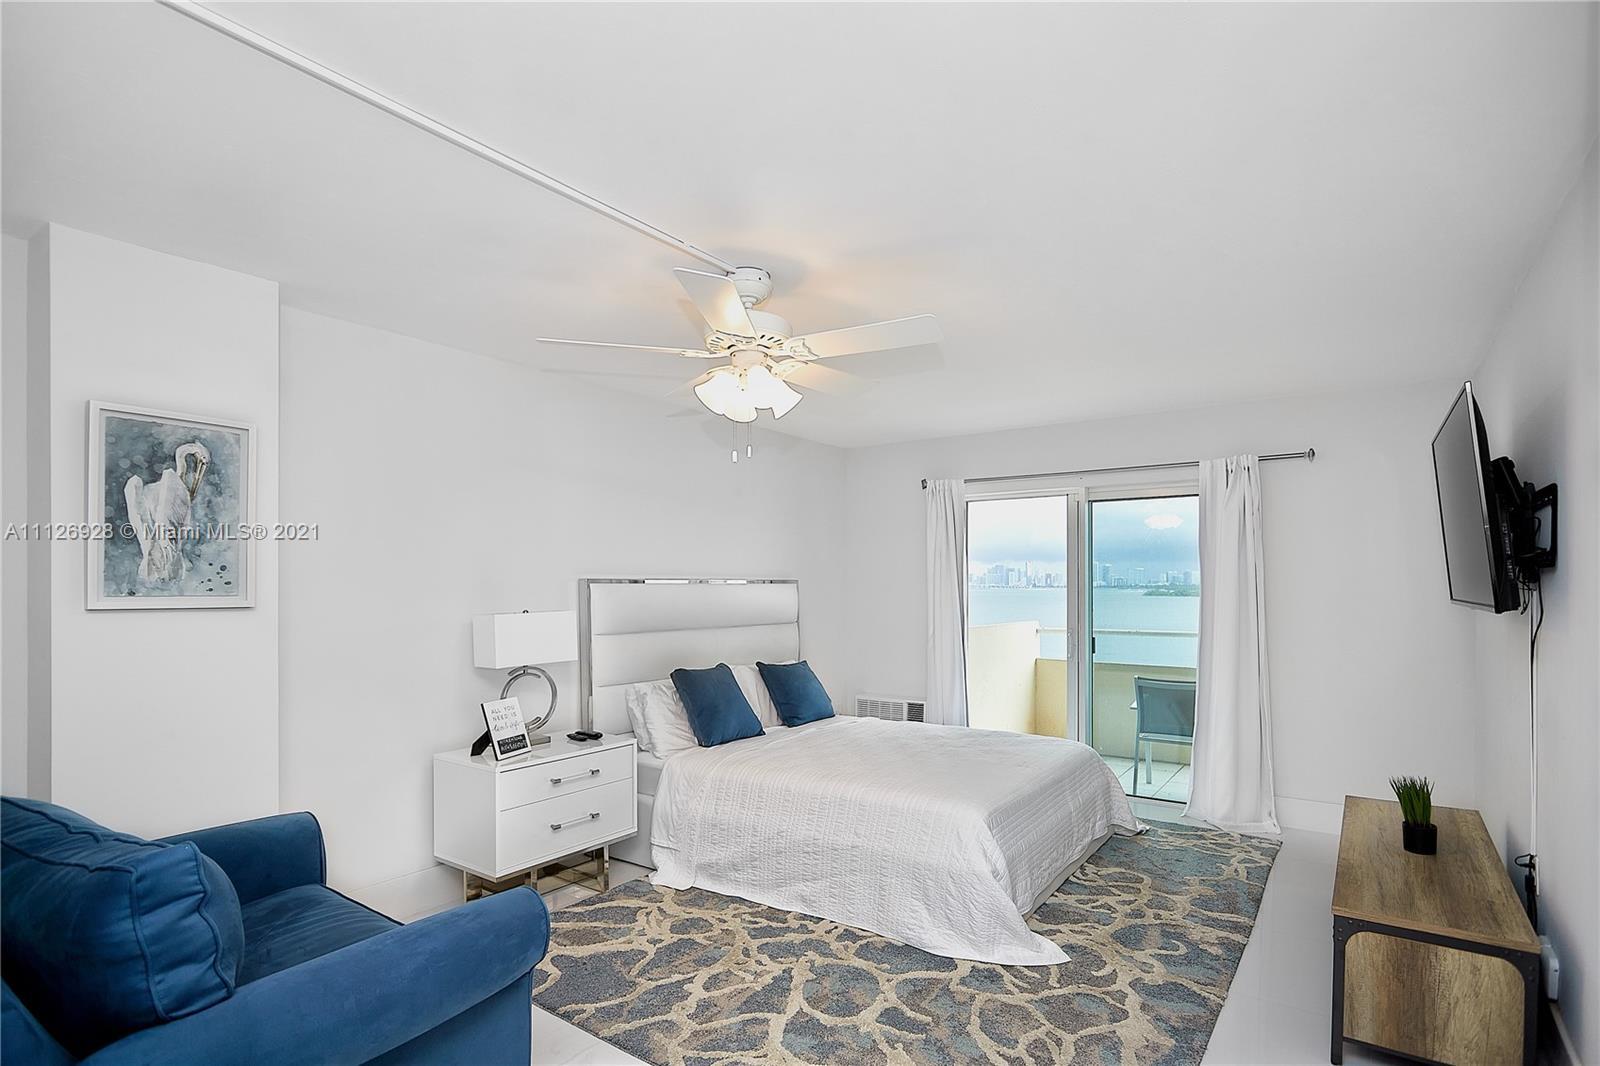 This newly renovated, centrally located studio has amazing unobstructed views of Biscayne Bay and Do